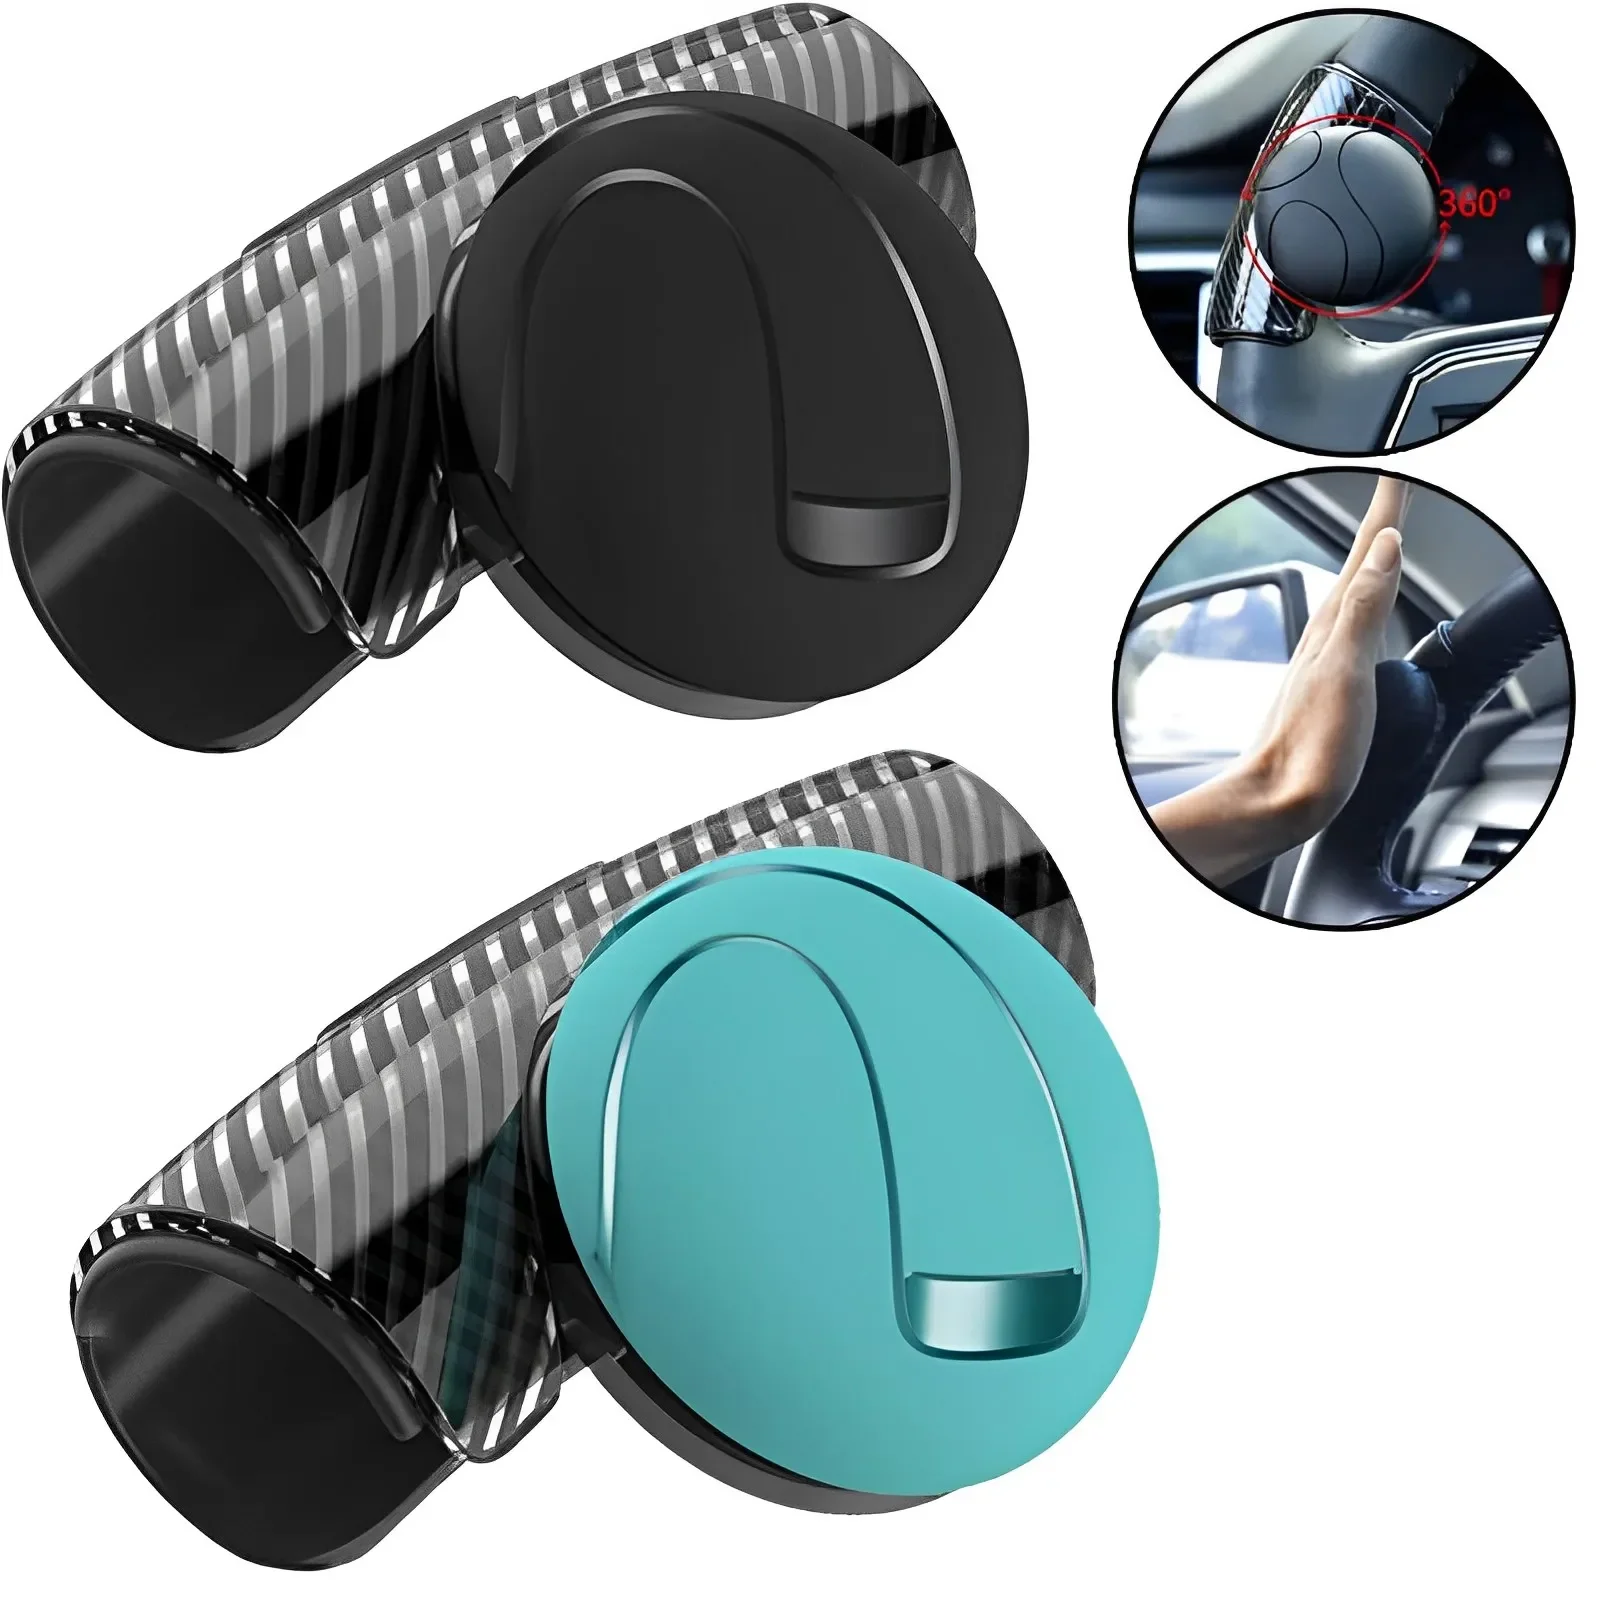 

Car 360° Steering Wheel Spinner Knob Power Handle Ball Hand Control Assister Grip Turning Helper Auxiliary Booster Strengthener